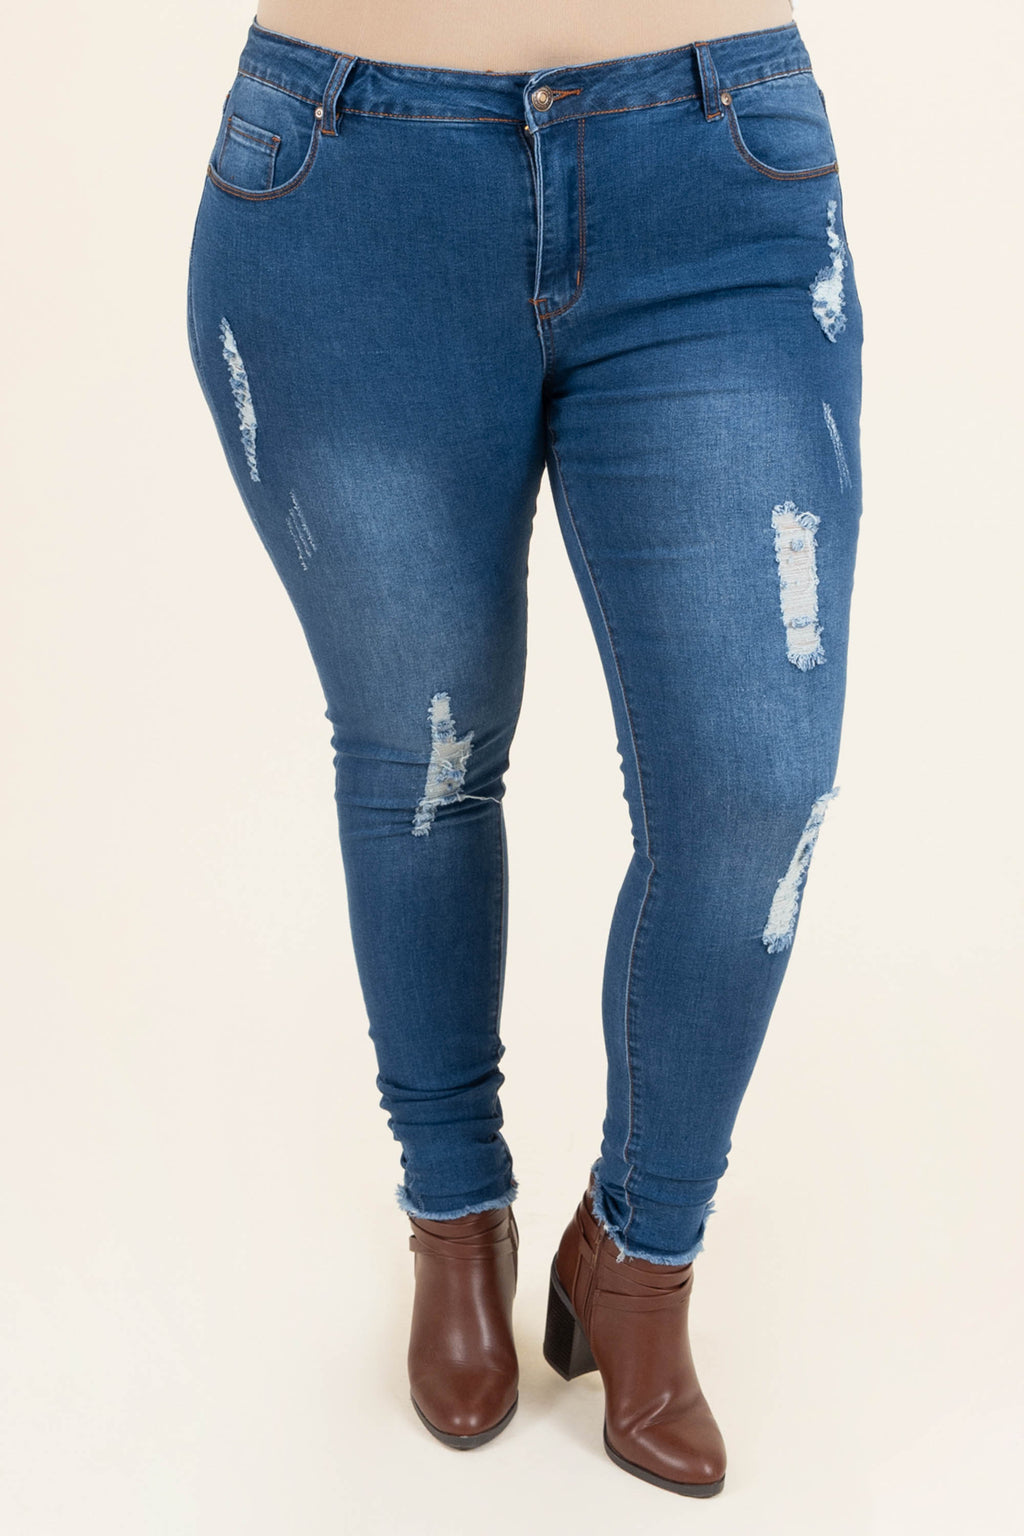 The Open Road Jeans, Medium Wash